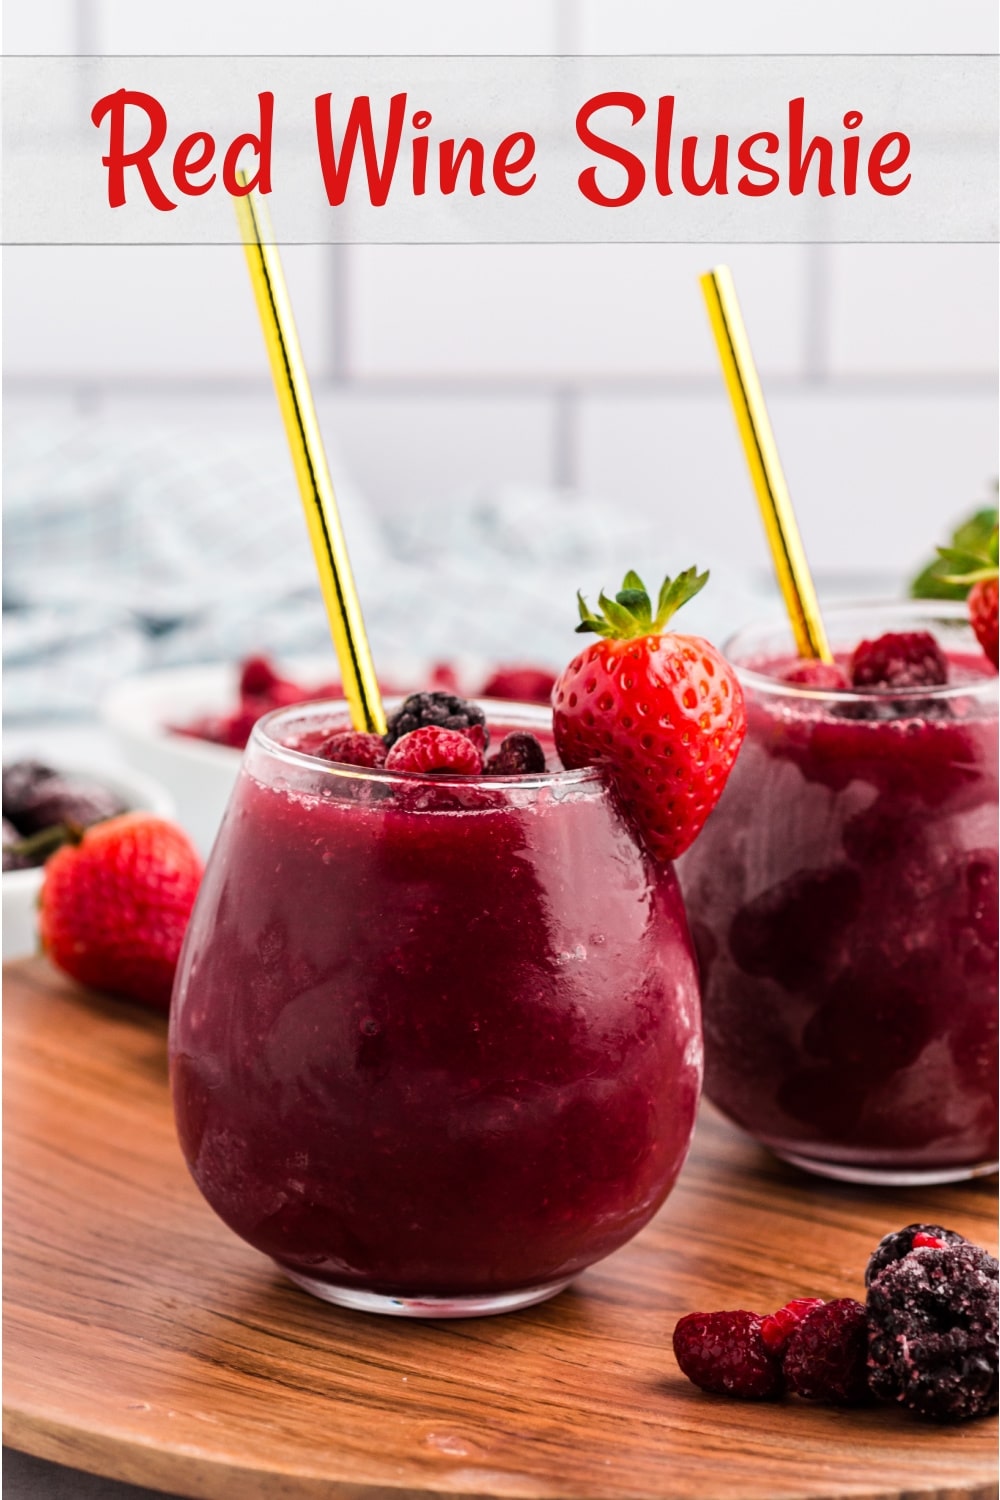 End your day with a refreshing Red Wine Slushie, it's the perfect way to unwind on a beautiful sunny day. via @cmpollak1